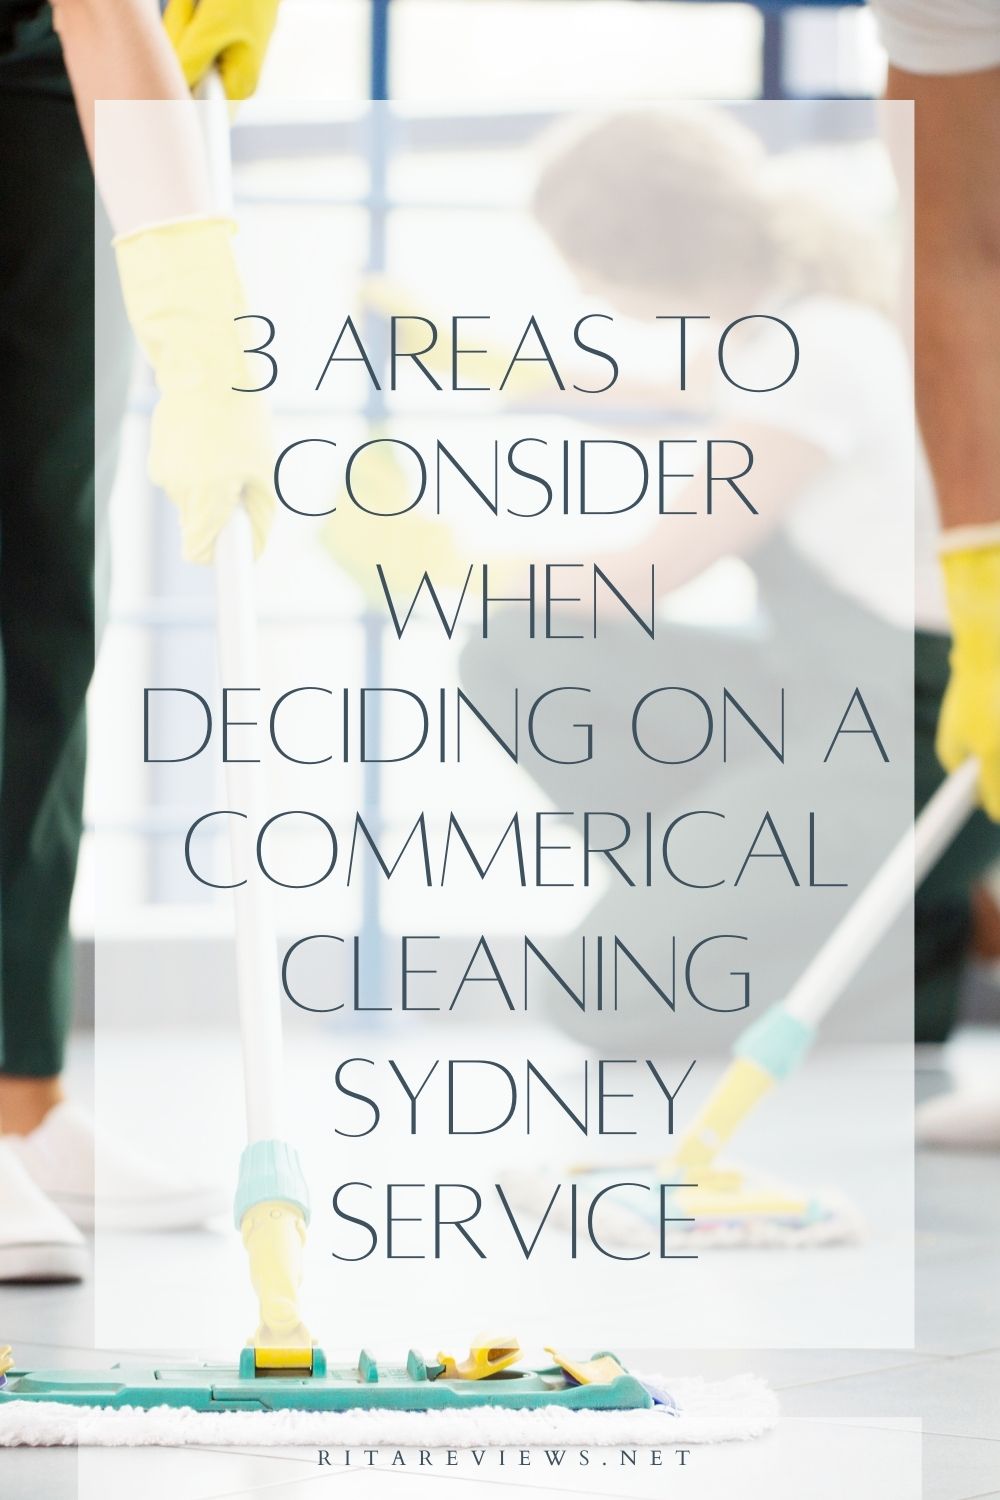 Three Areas To Consider When Deciding On A Commerical Cleaning Sydney Service